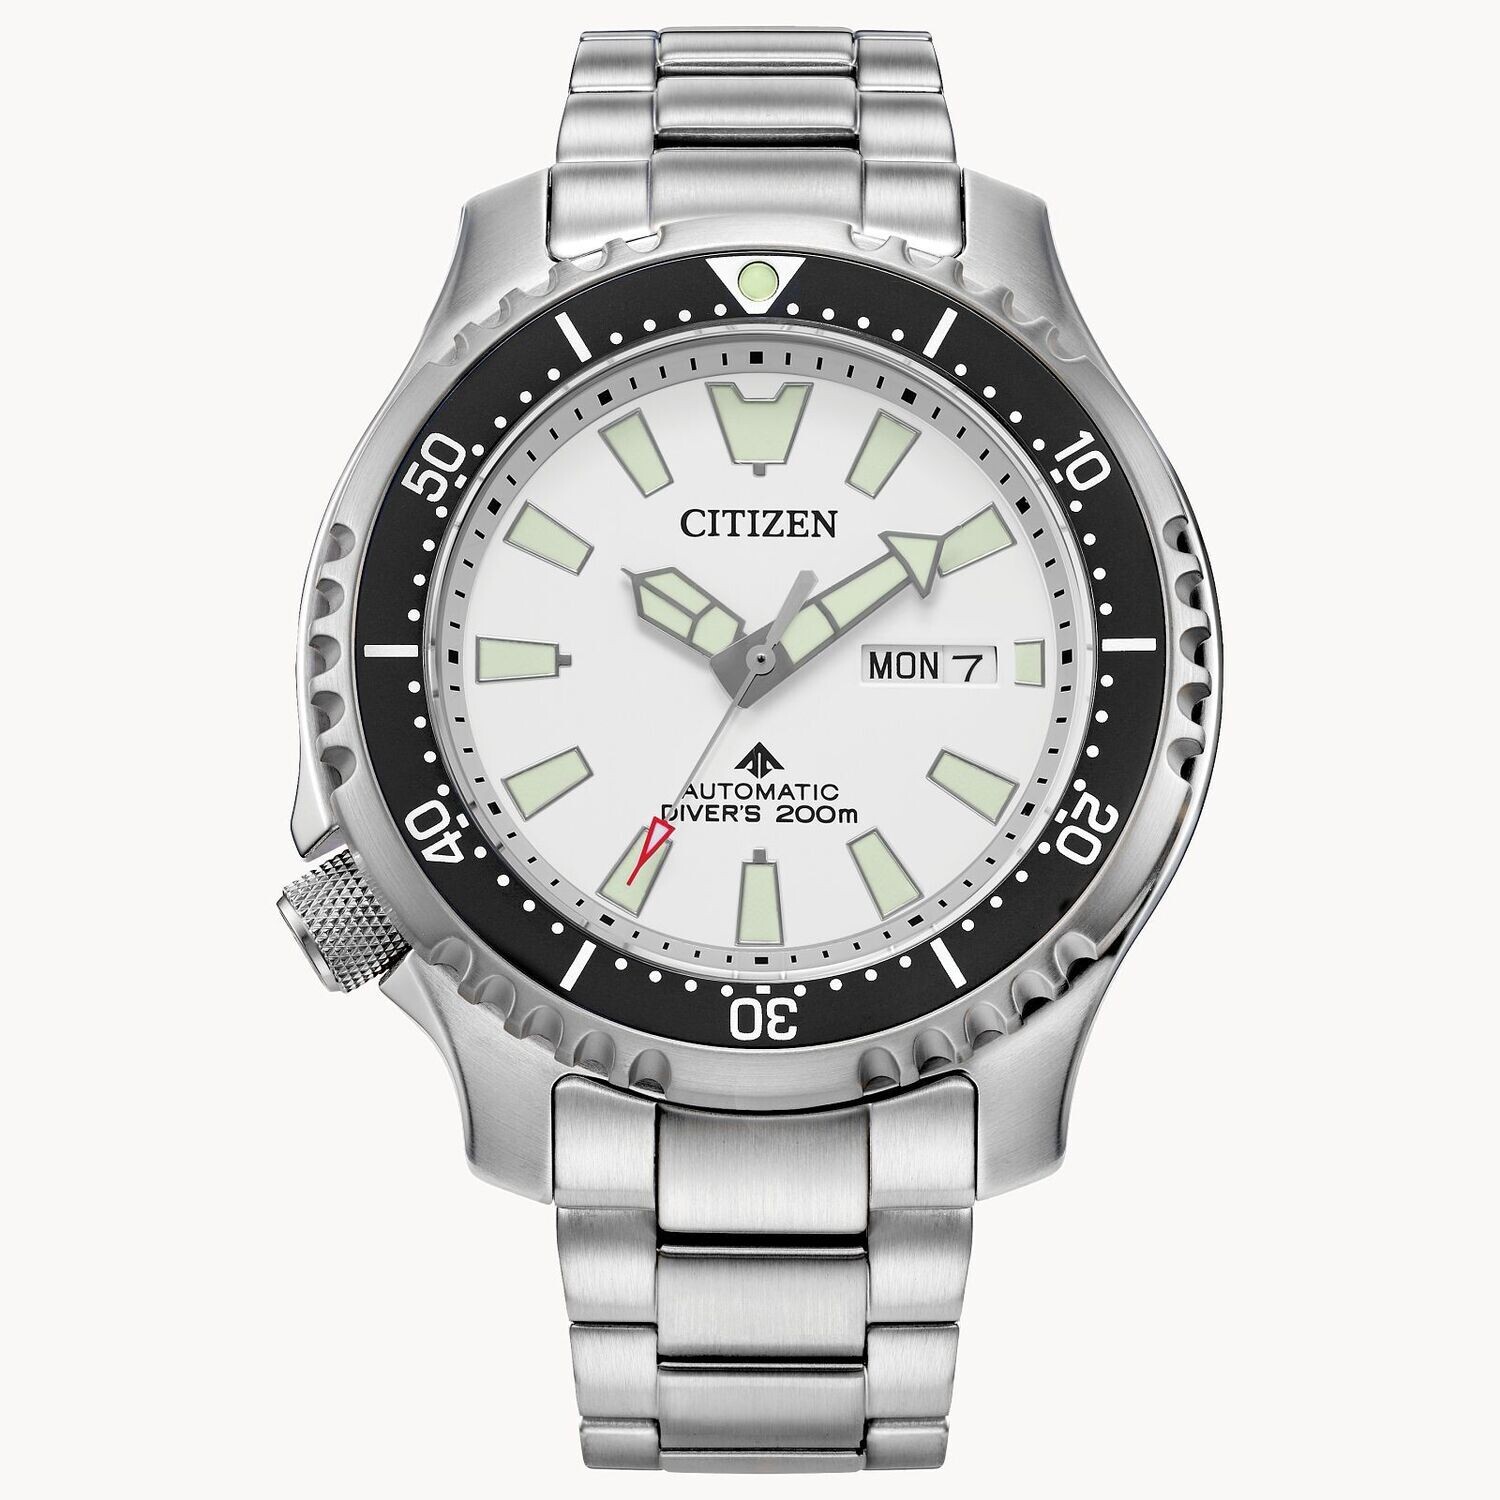 Citizen Promaster Dive FUGU NY0150-51A 44mm 200m WR sapphire crystal automatic divers men’s watch white dial stainless steel bracelet